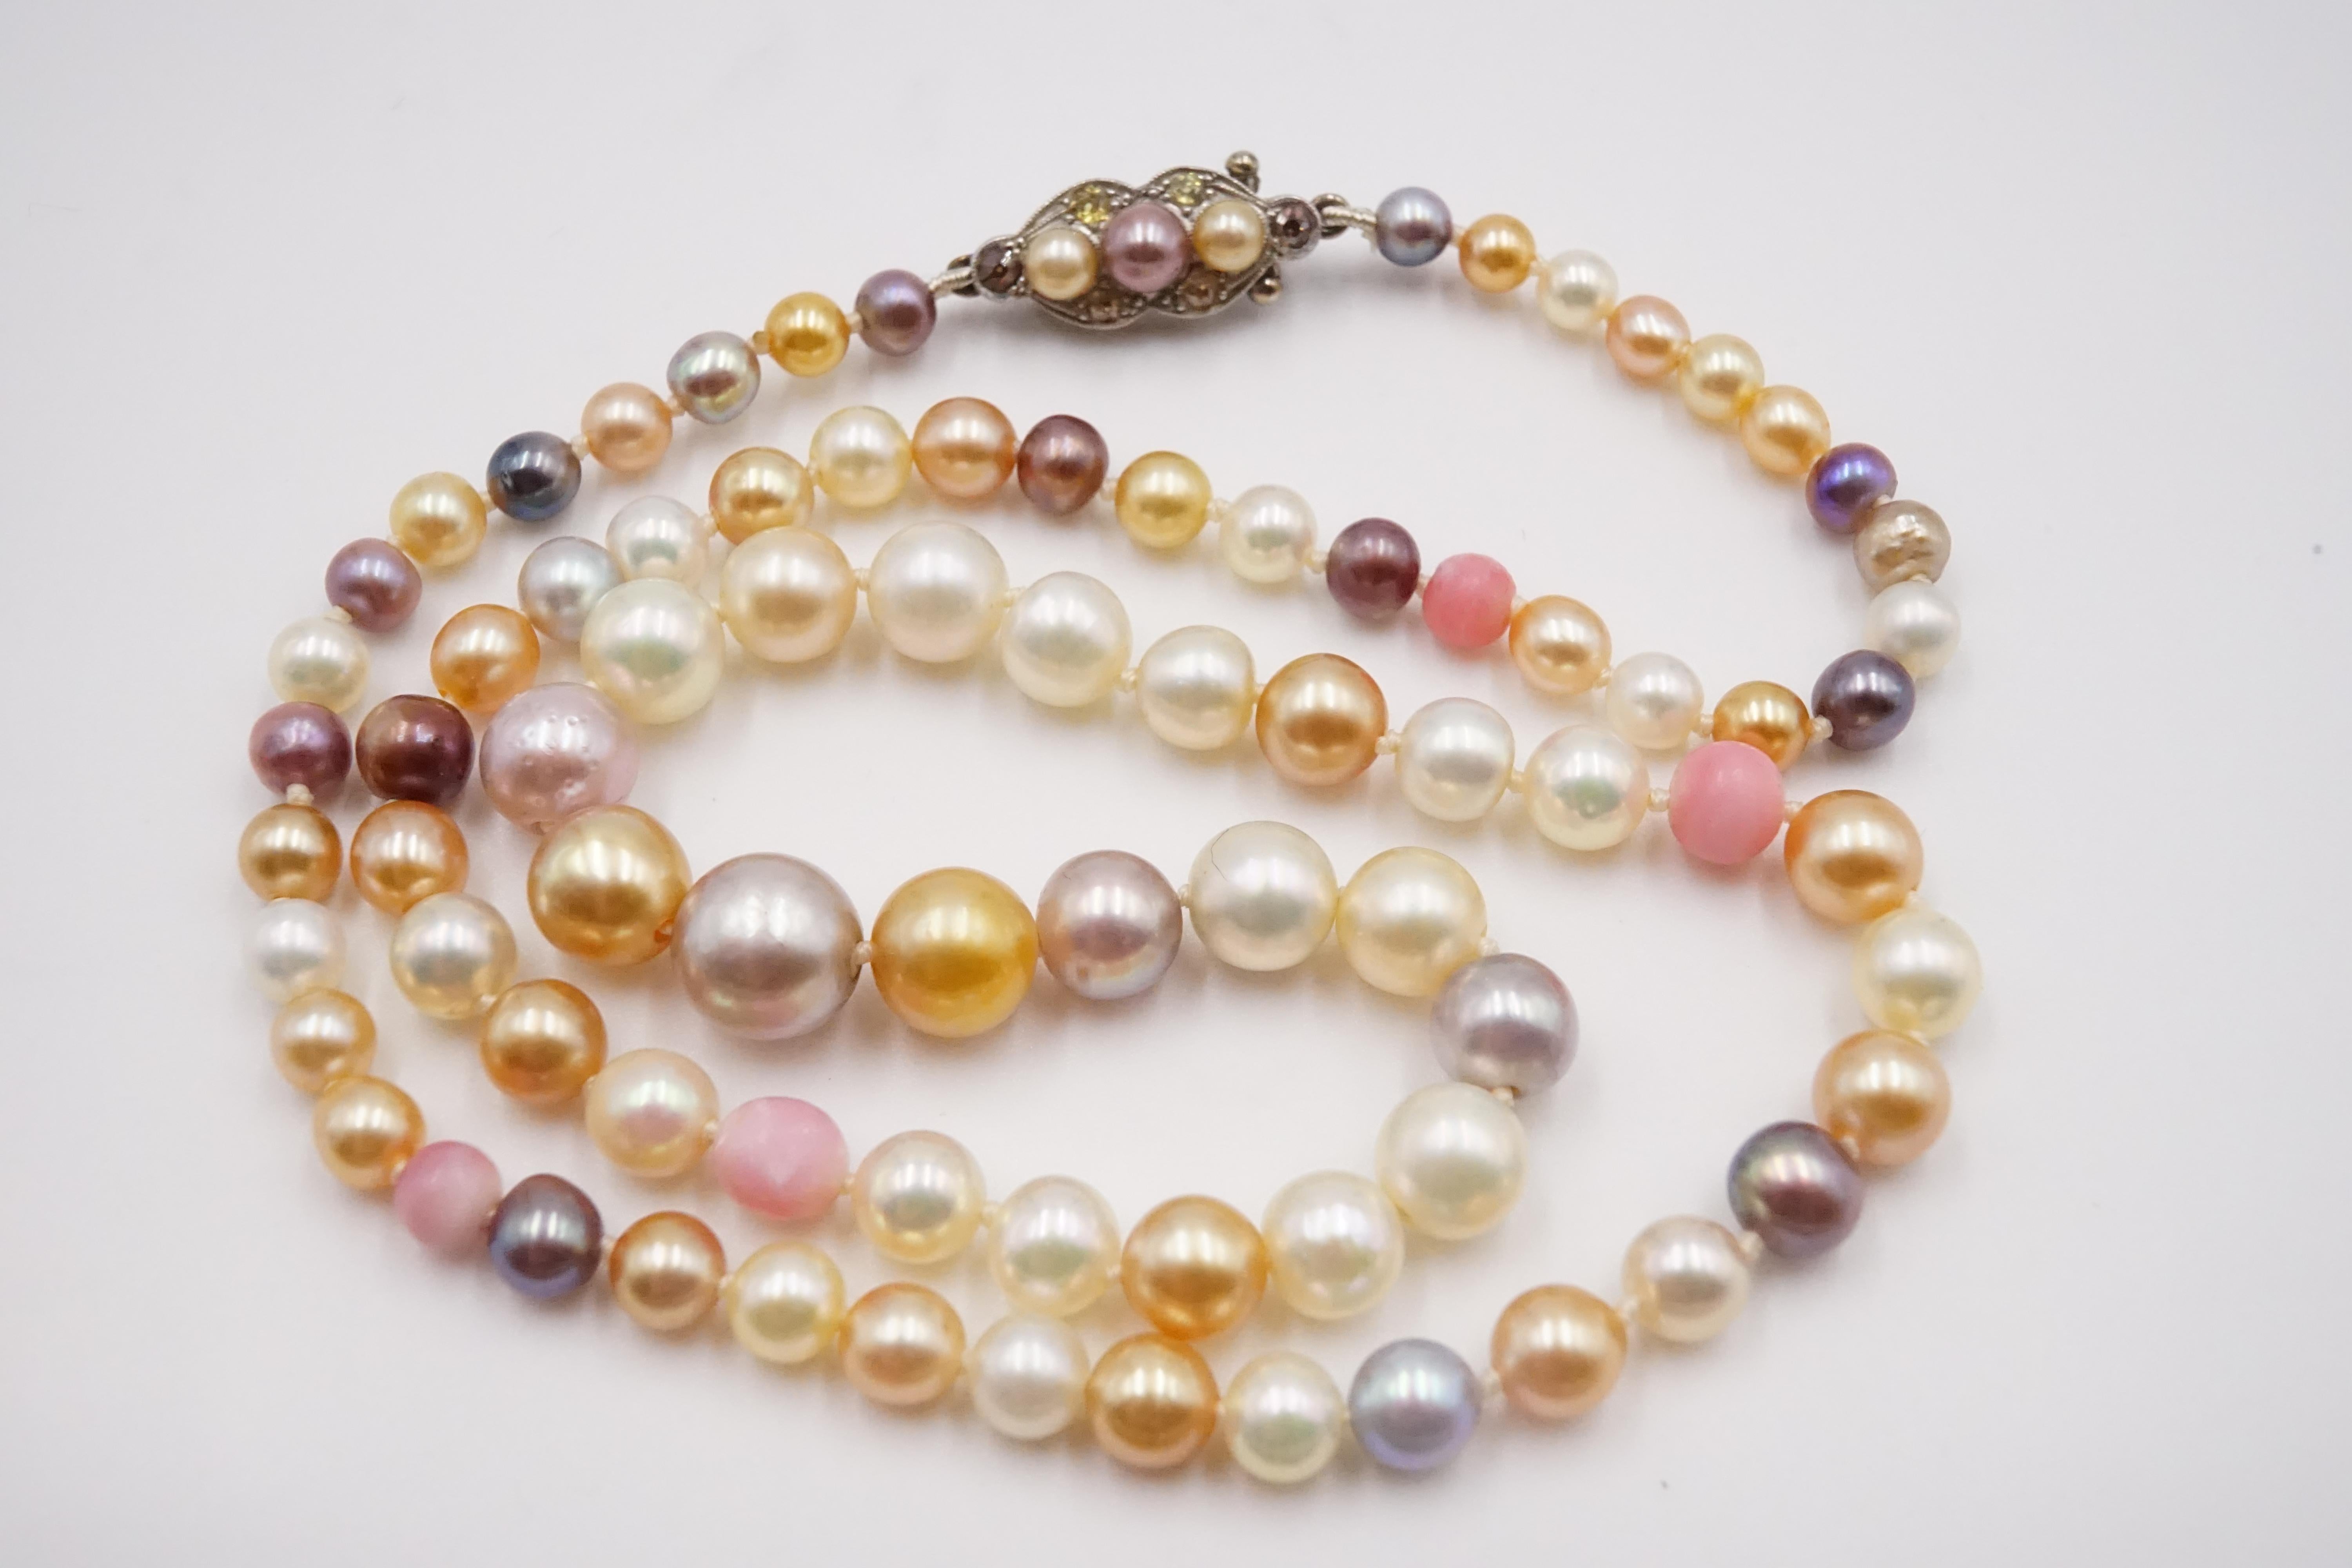 Old European Cut Edwardian Multicolored Natural Pearl, Colored Diamond Necklace Earring Set